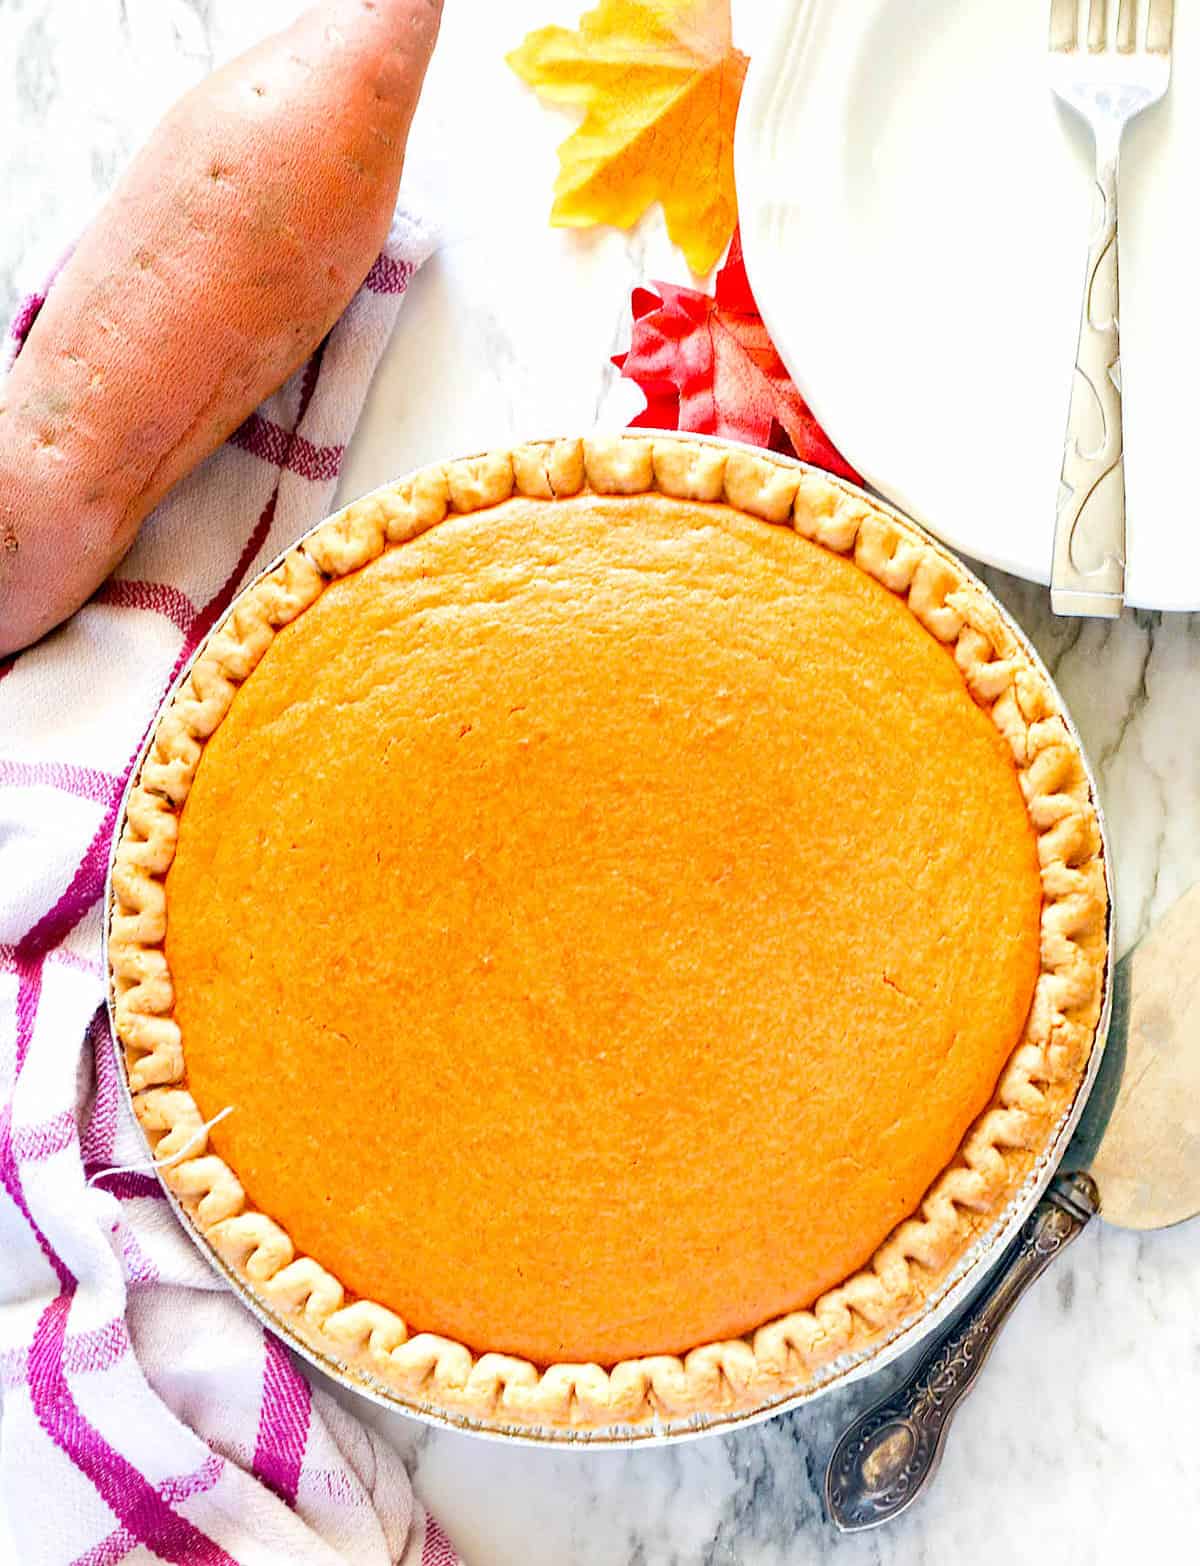 Sweet potato pie fresh from the oven